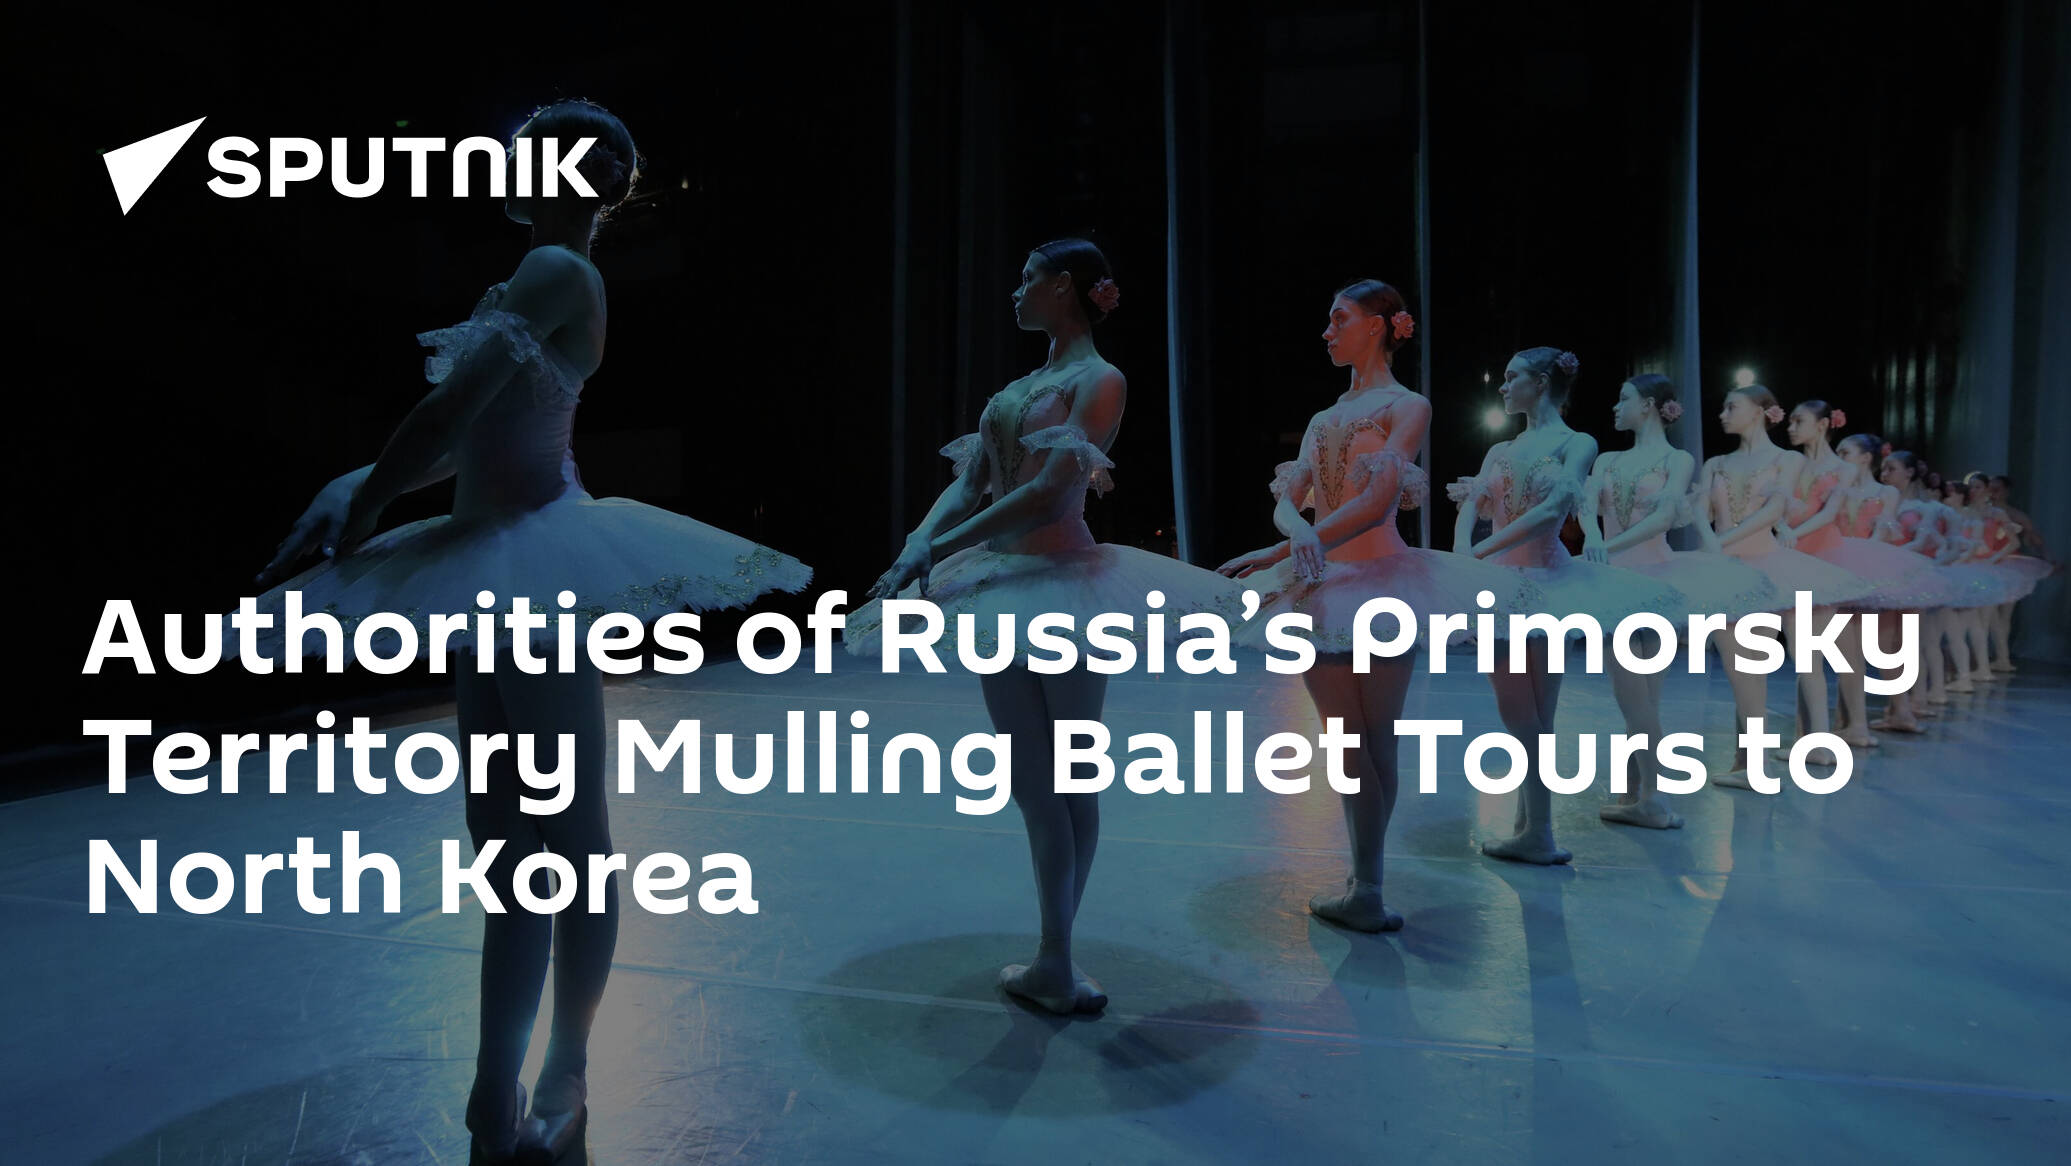 Authorities of Russia’s Primorsky Territory Mulling Ballet Tours to North Korea